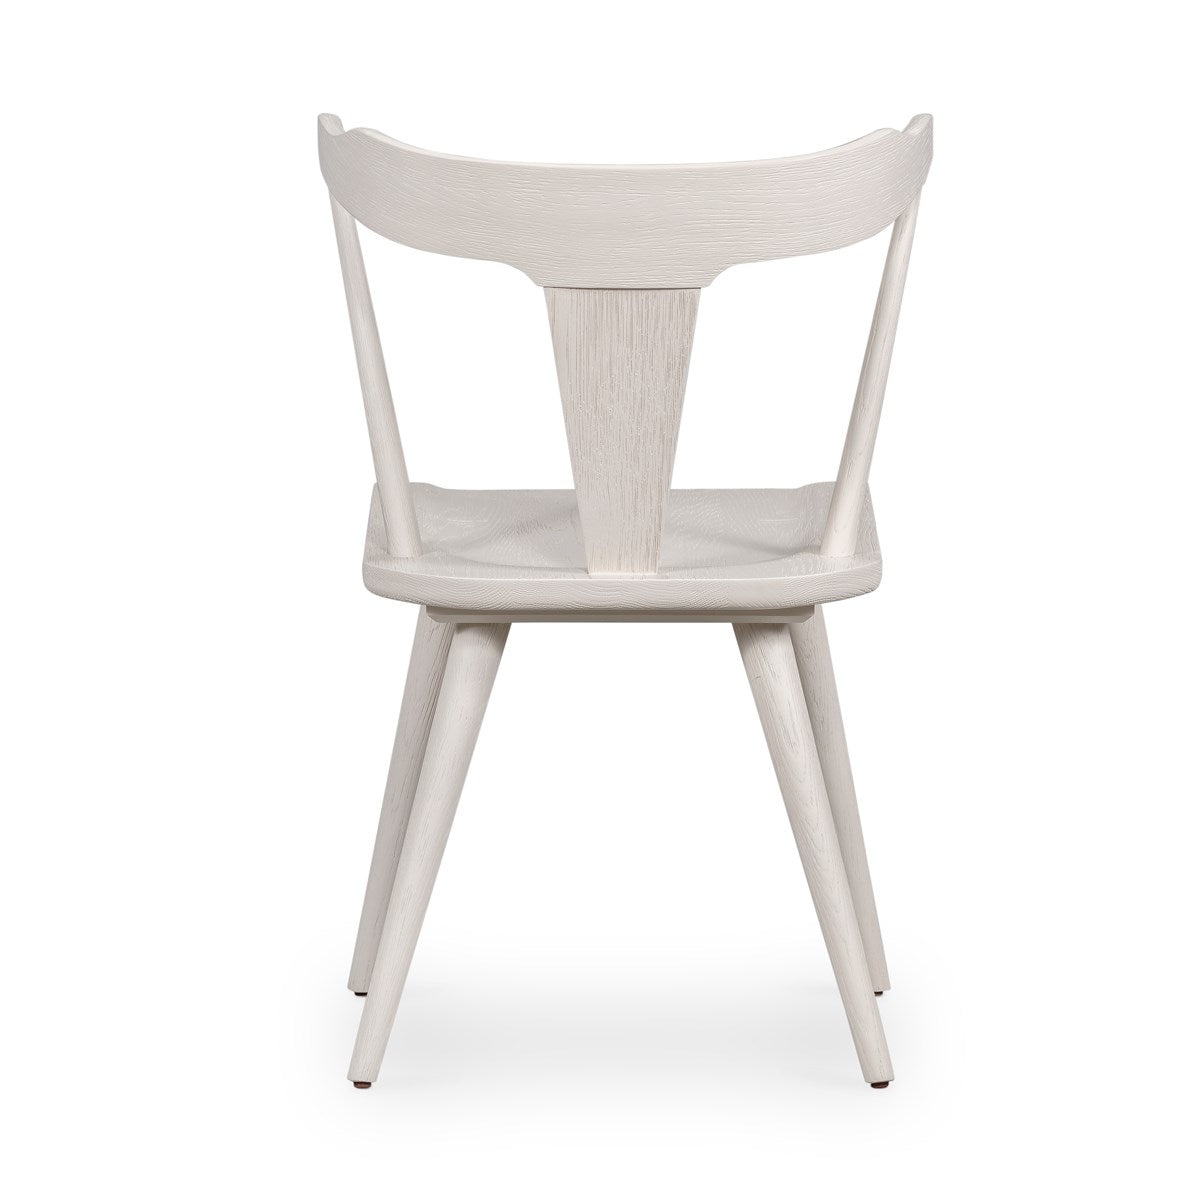 Load image into Gallery viewer, Ripley Dining Chair Dinning Chair Four Hands     Four Hands, Burke Decor, Mid Century Modern Furniture, Old Bones Furniture Company, Old Bones Co, Modern Mid Century, Designer Furniture, https://www.oldbonesco.com/
